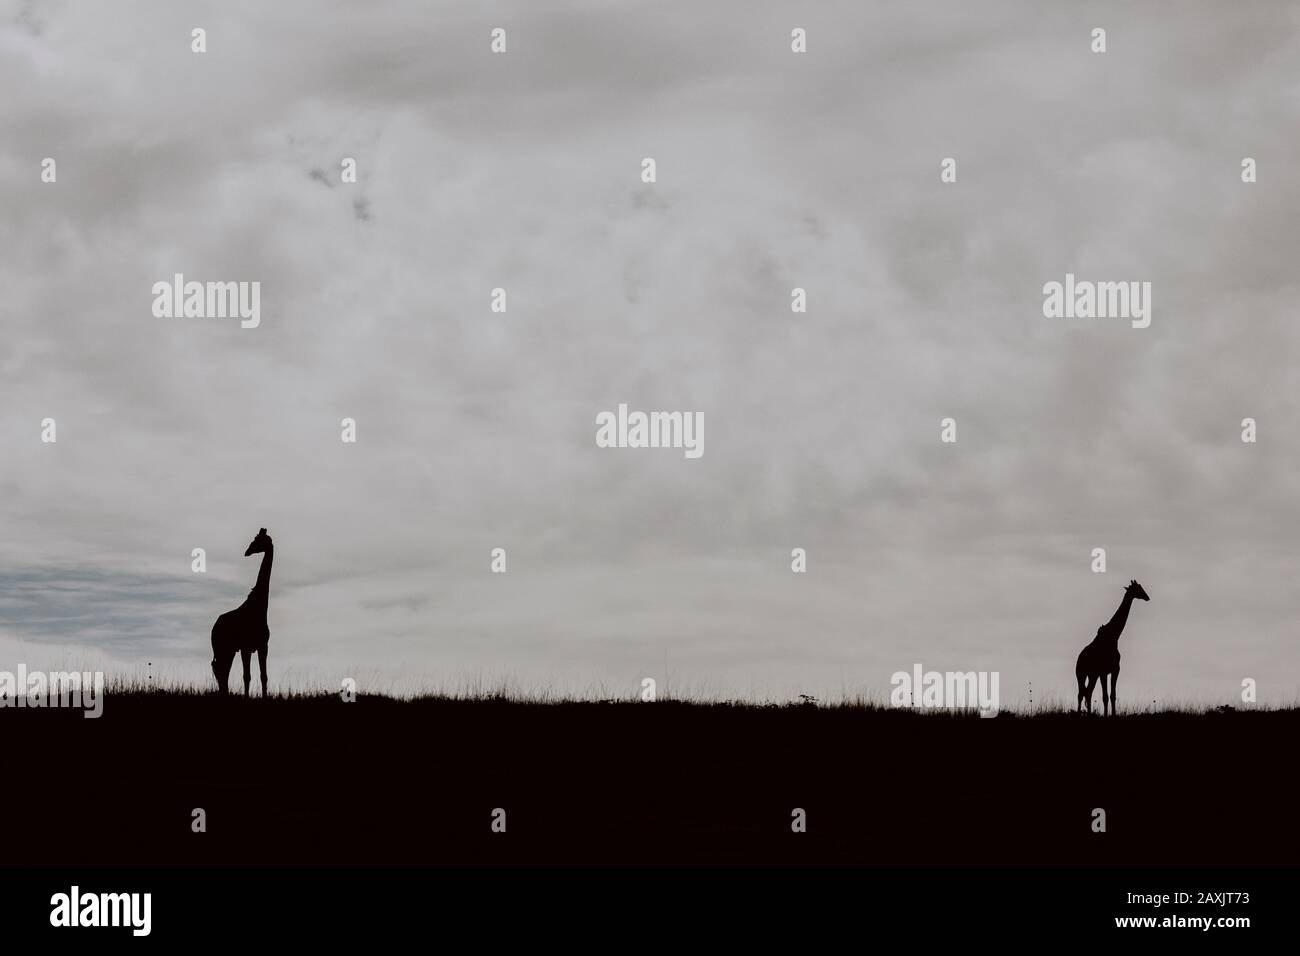 Two giraffes standing at the bottom of the picture, looking in two different directions. You can only see the silhouettes of the giraffes. Serengeti Stock Photo